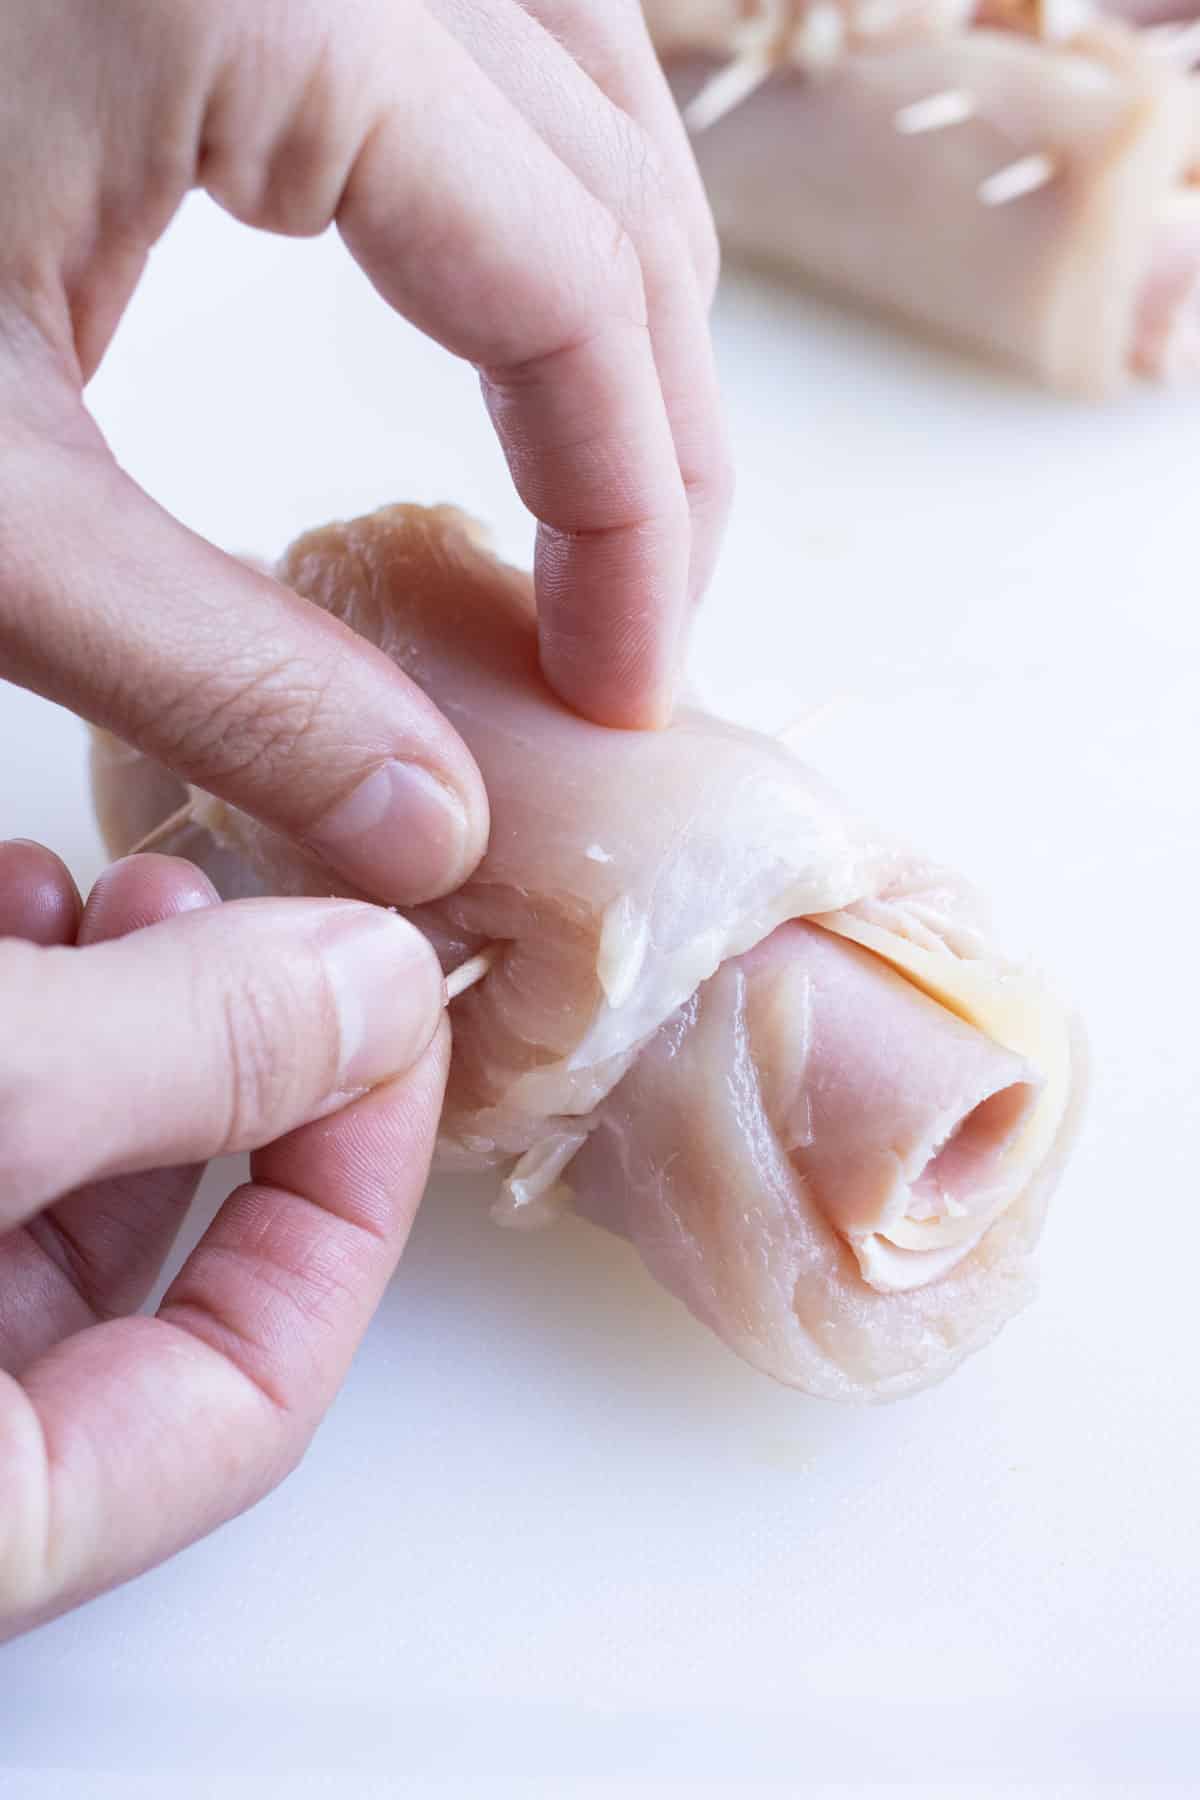 Toothpicks are used to hold the rolled chicken together.